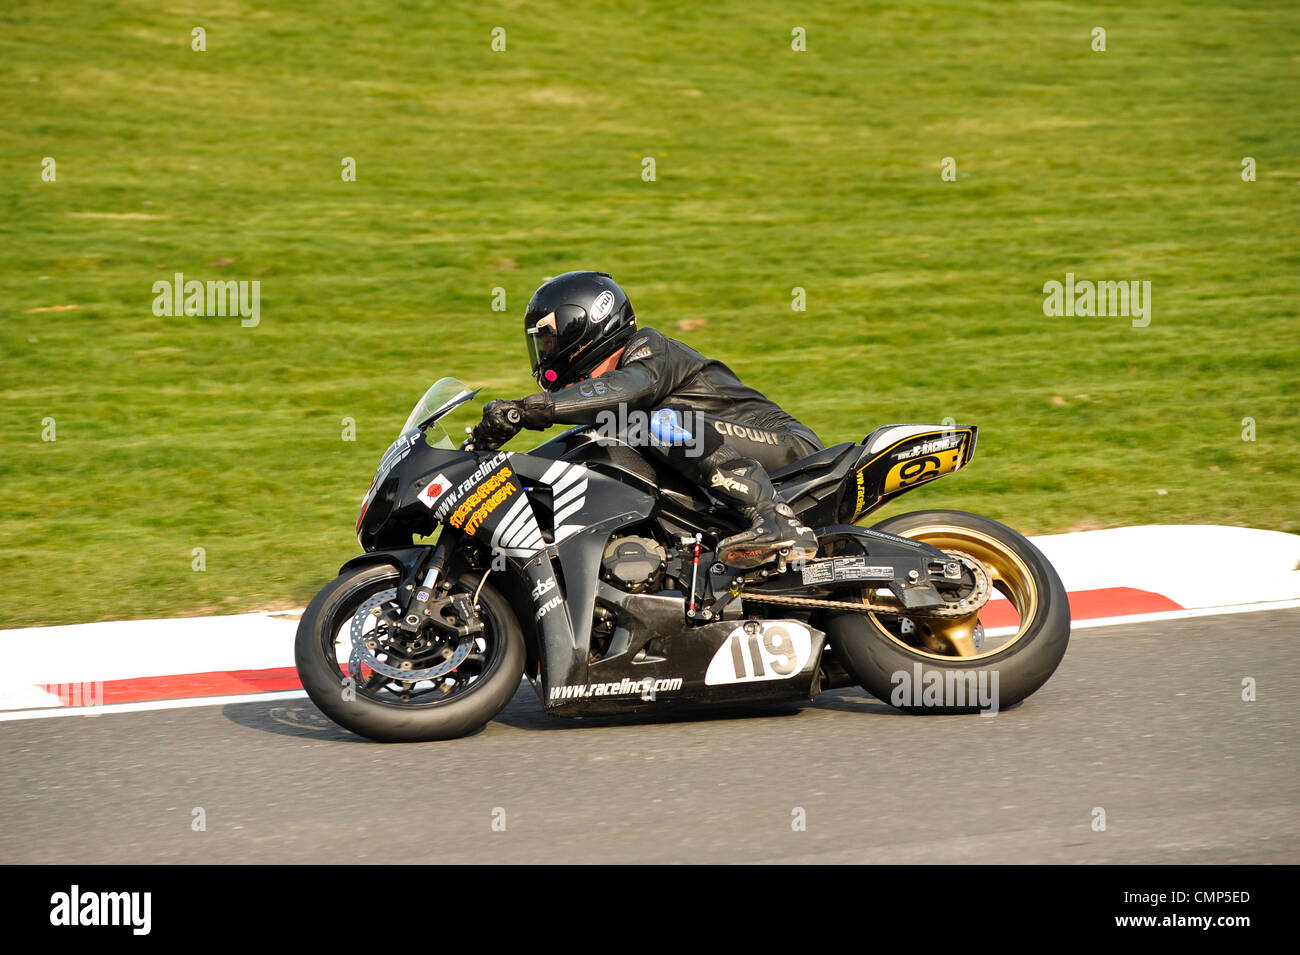 Motorcyclist on track, Cadwell Park. March 2012 Stock Photo